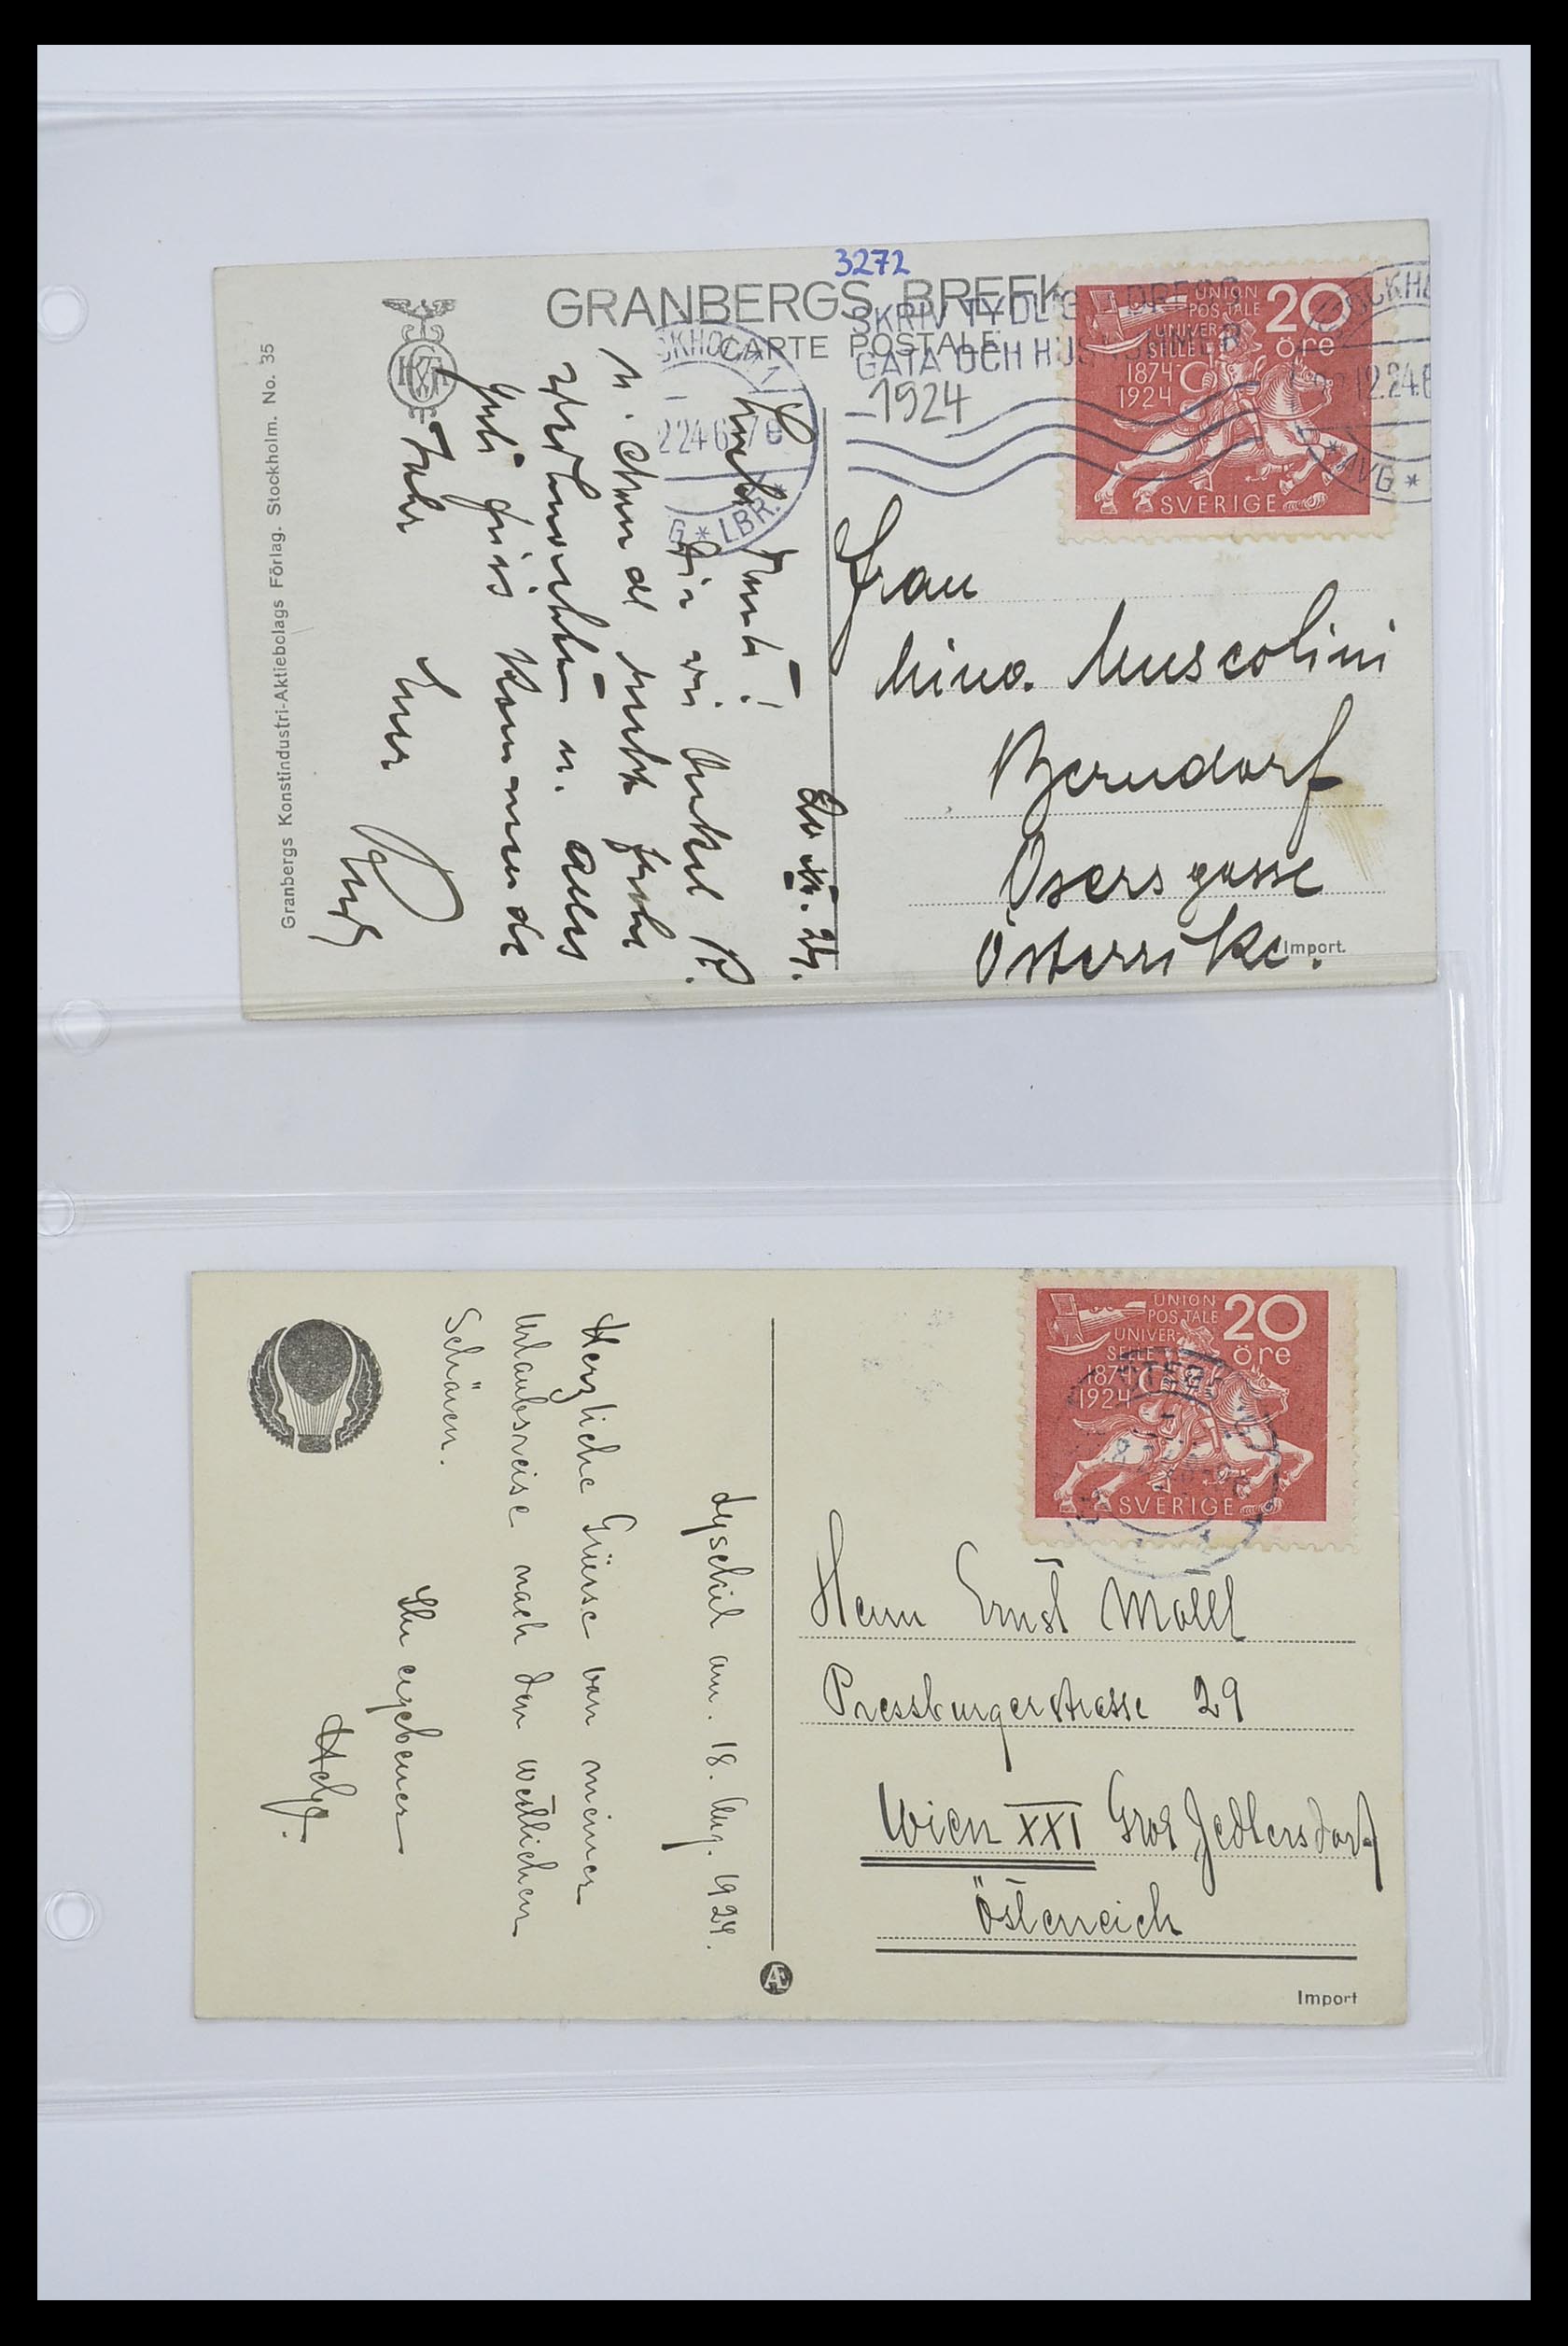 33241 031 - Stamp collection 33241 Scandinavia covers 1860-1930.